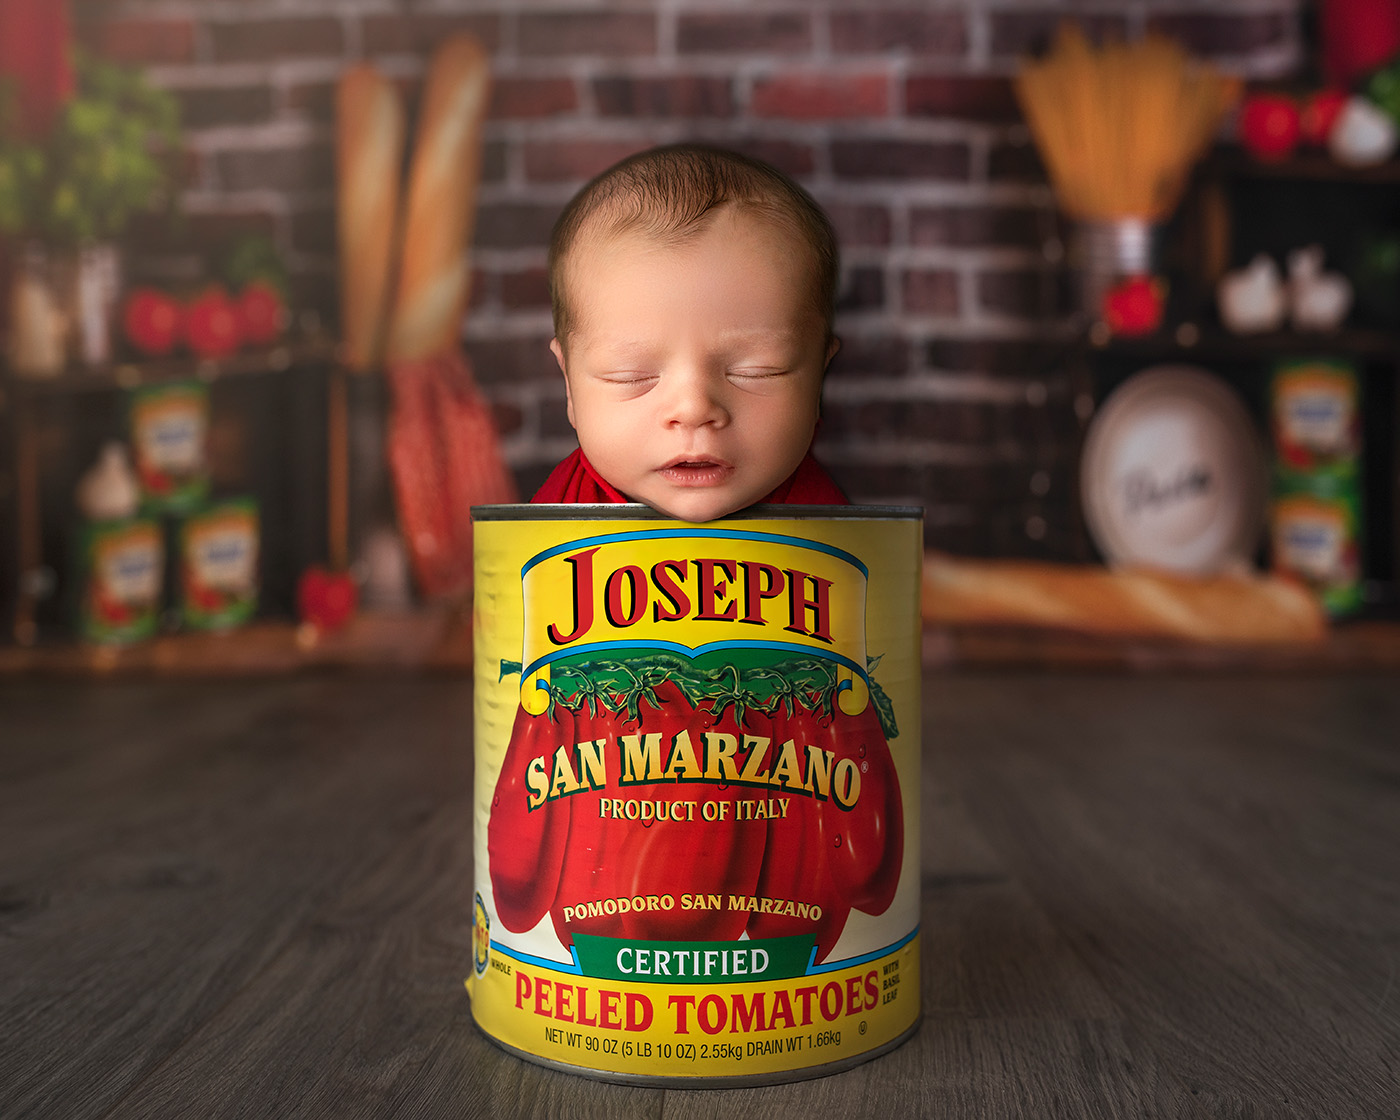 Newborn Photography Shoot Baby Joseph sleeps peacefully in a can of tomatoes in front of a trattoria, capturing the essence of his Italian heritage.